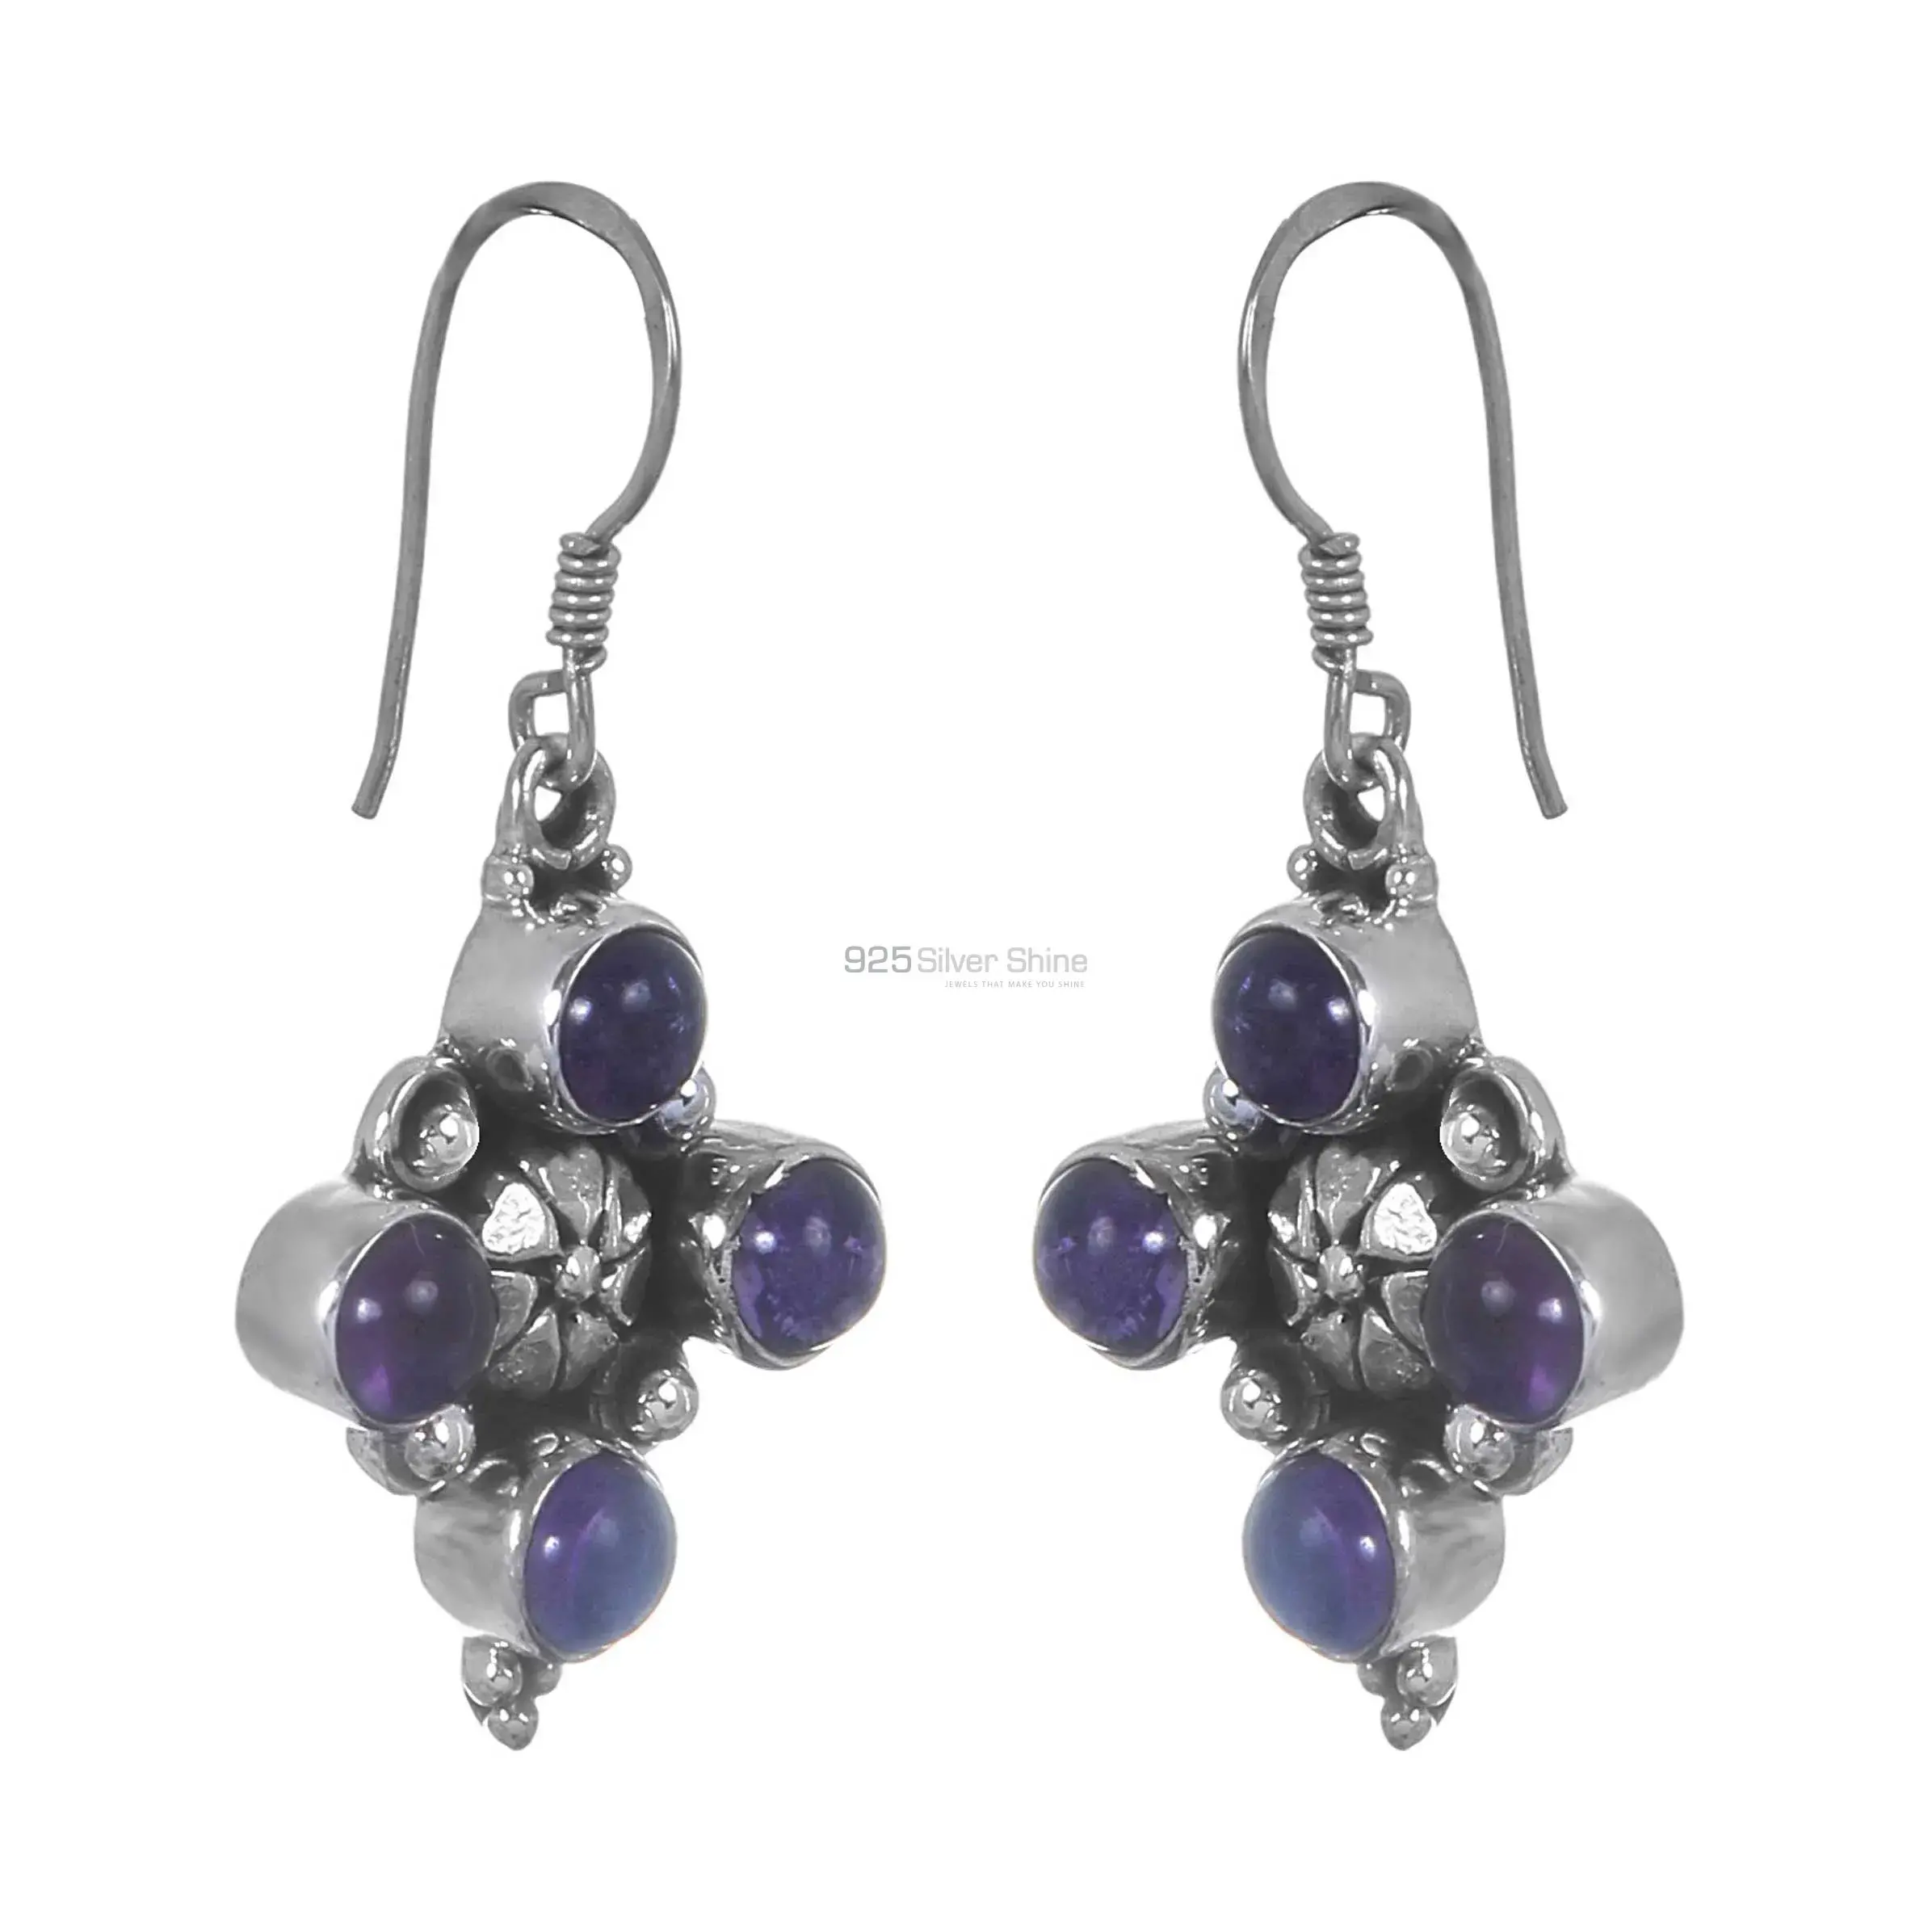 Affordable 925 Sterling Silver Handmade Earrings Suppliers In Lapis Lazuli Gemstone Jewelry 925SE292_0